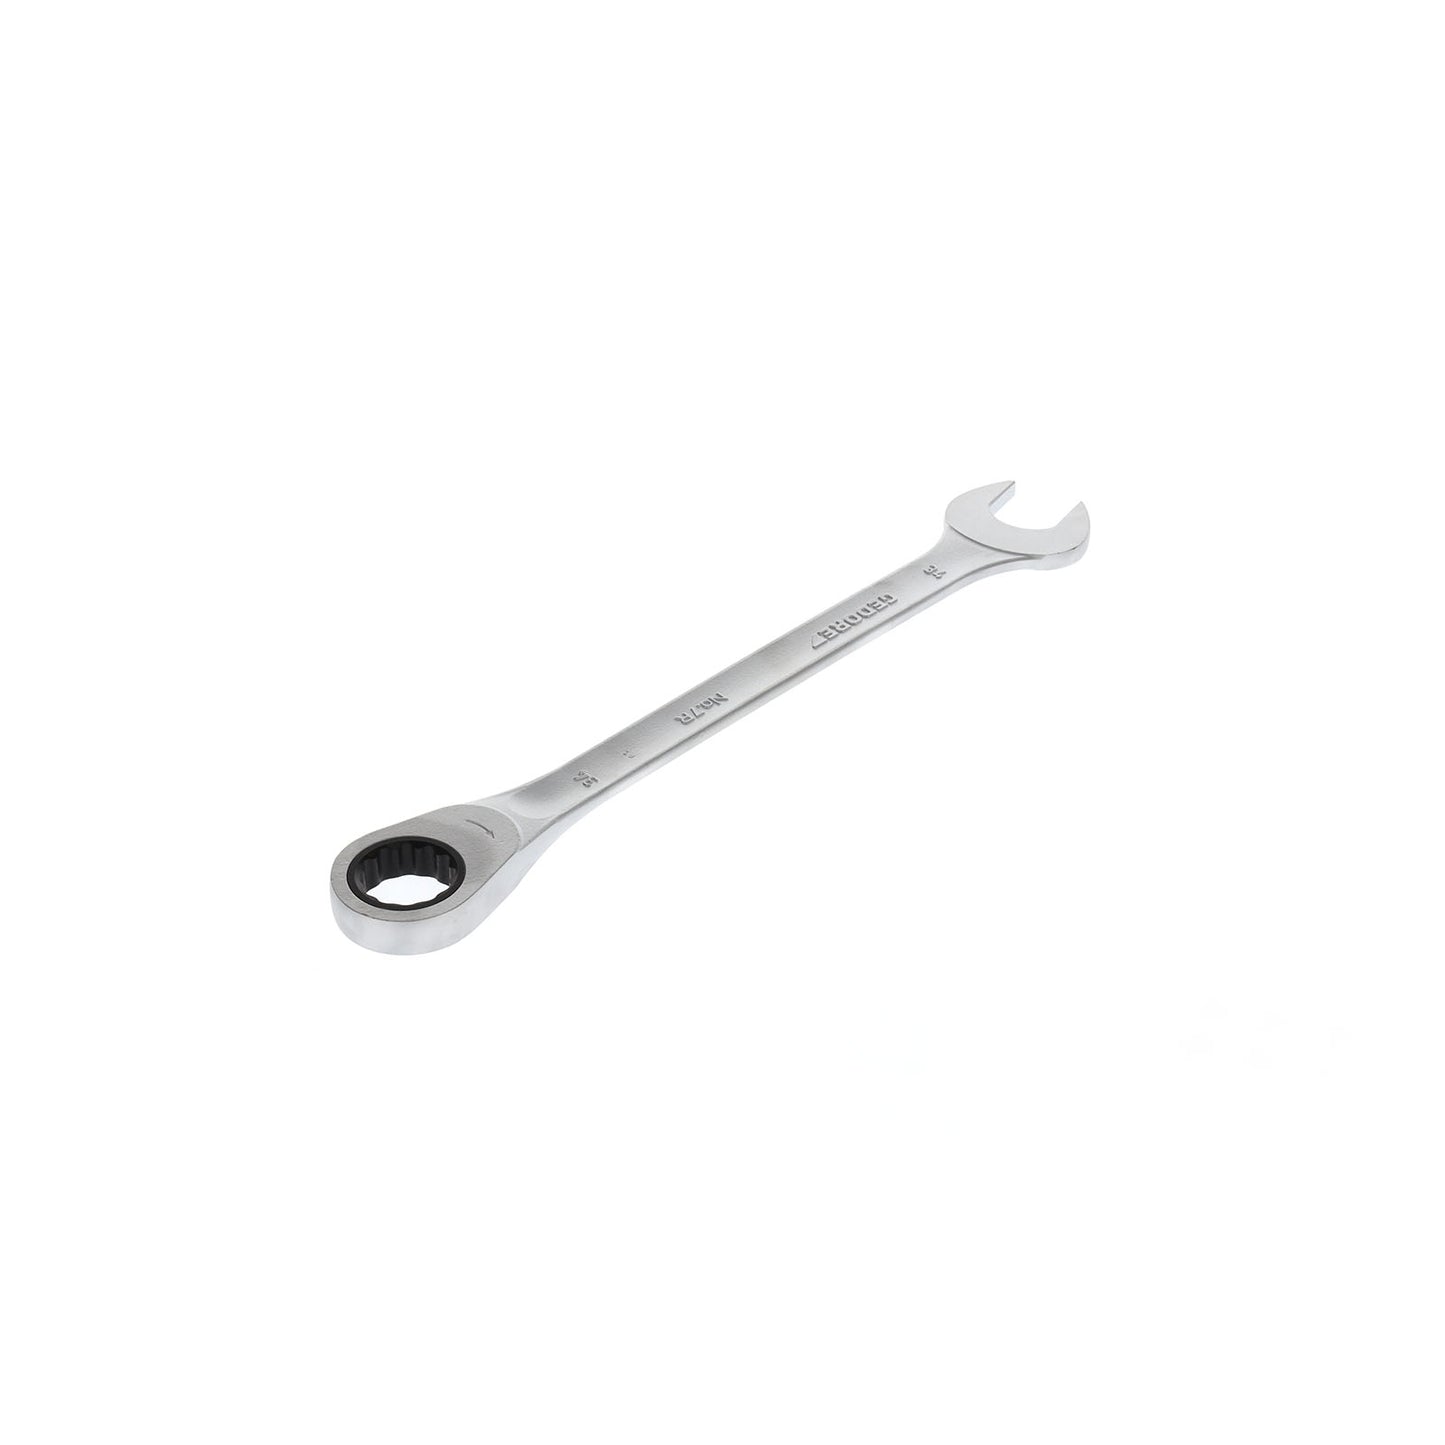 GEDORE 7 R 34 - Ratchet combination wrench, 34mm (2219549)